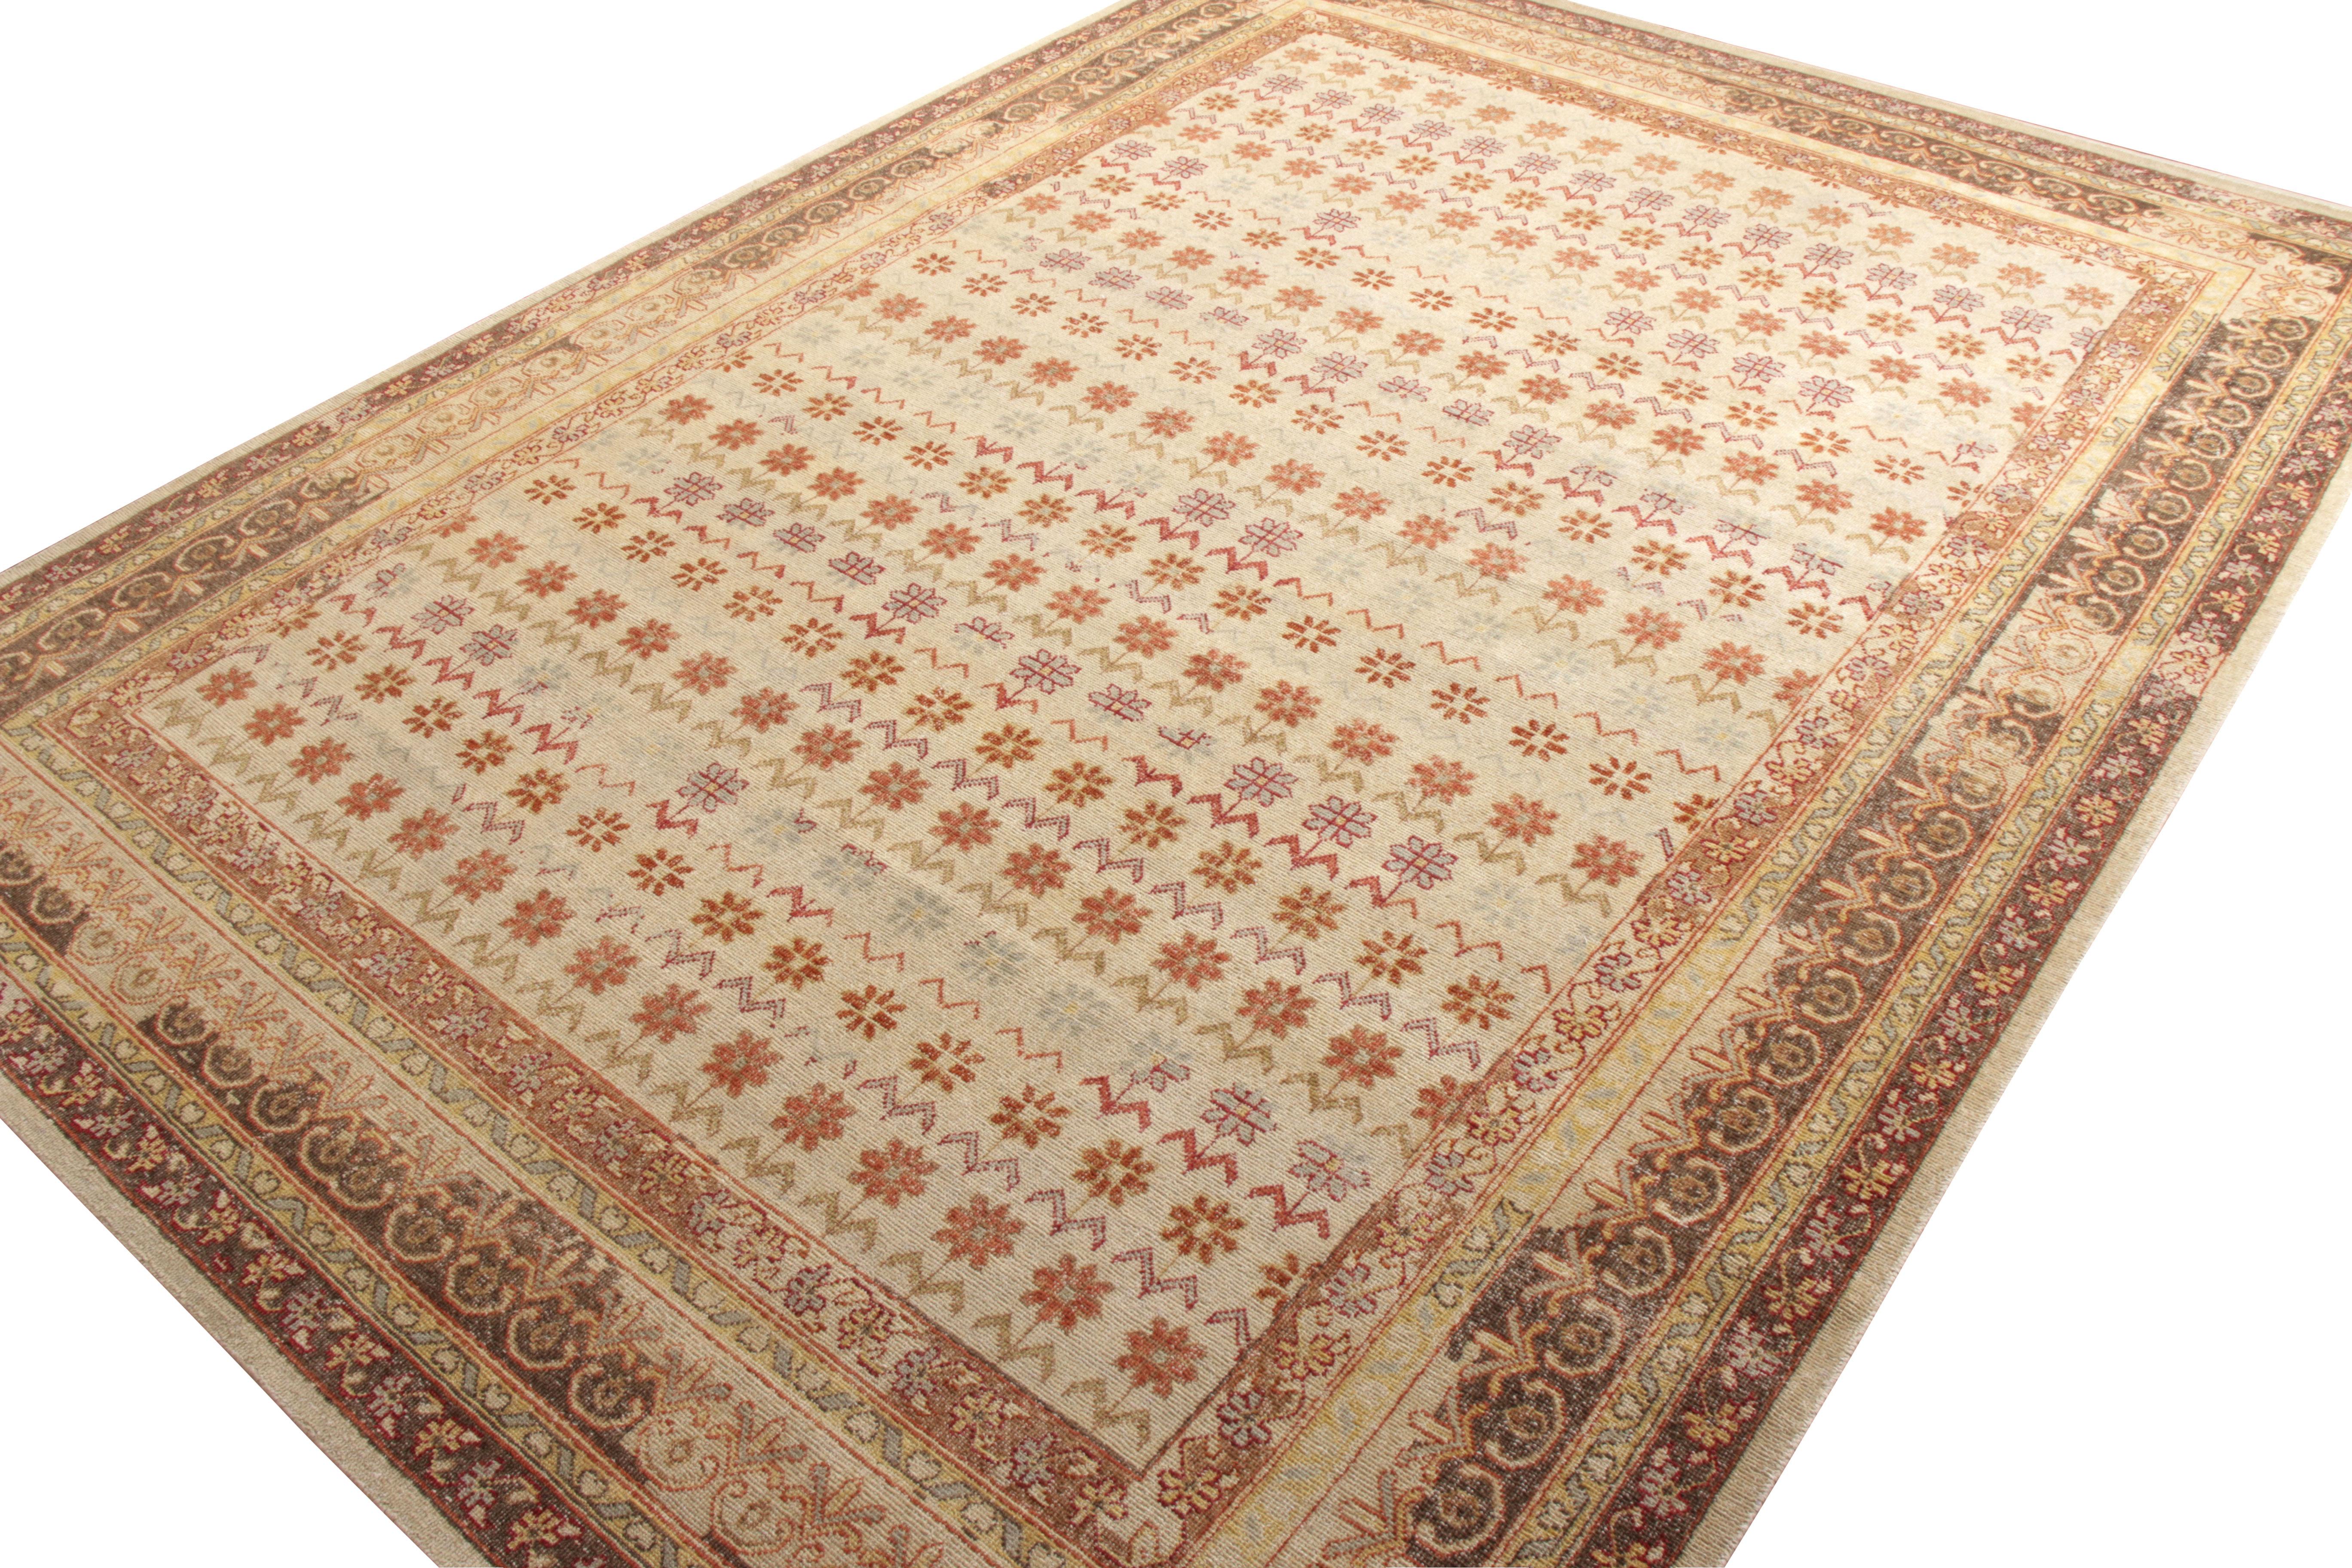 Tribal Rug & Kilim’s Distressed Style Rug in Beige-Brown and Red Floral Pattern For Sale